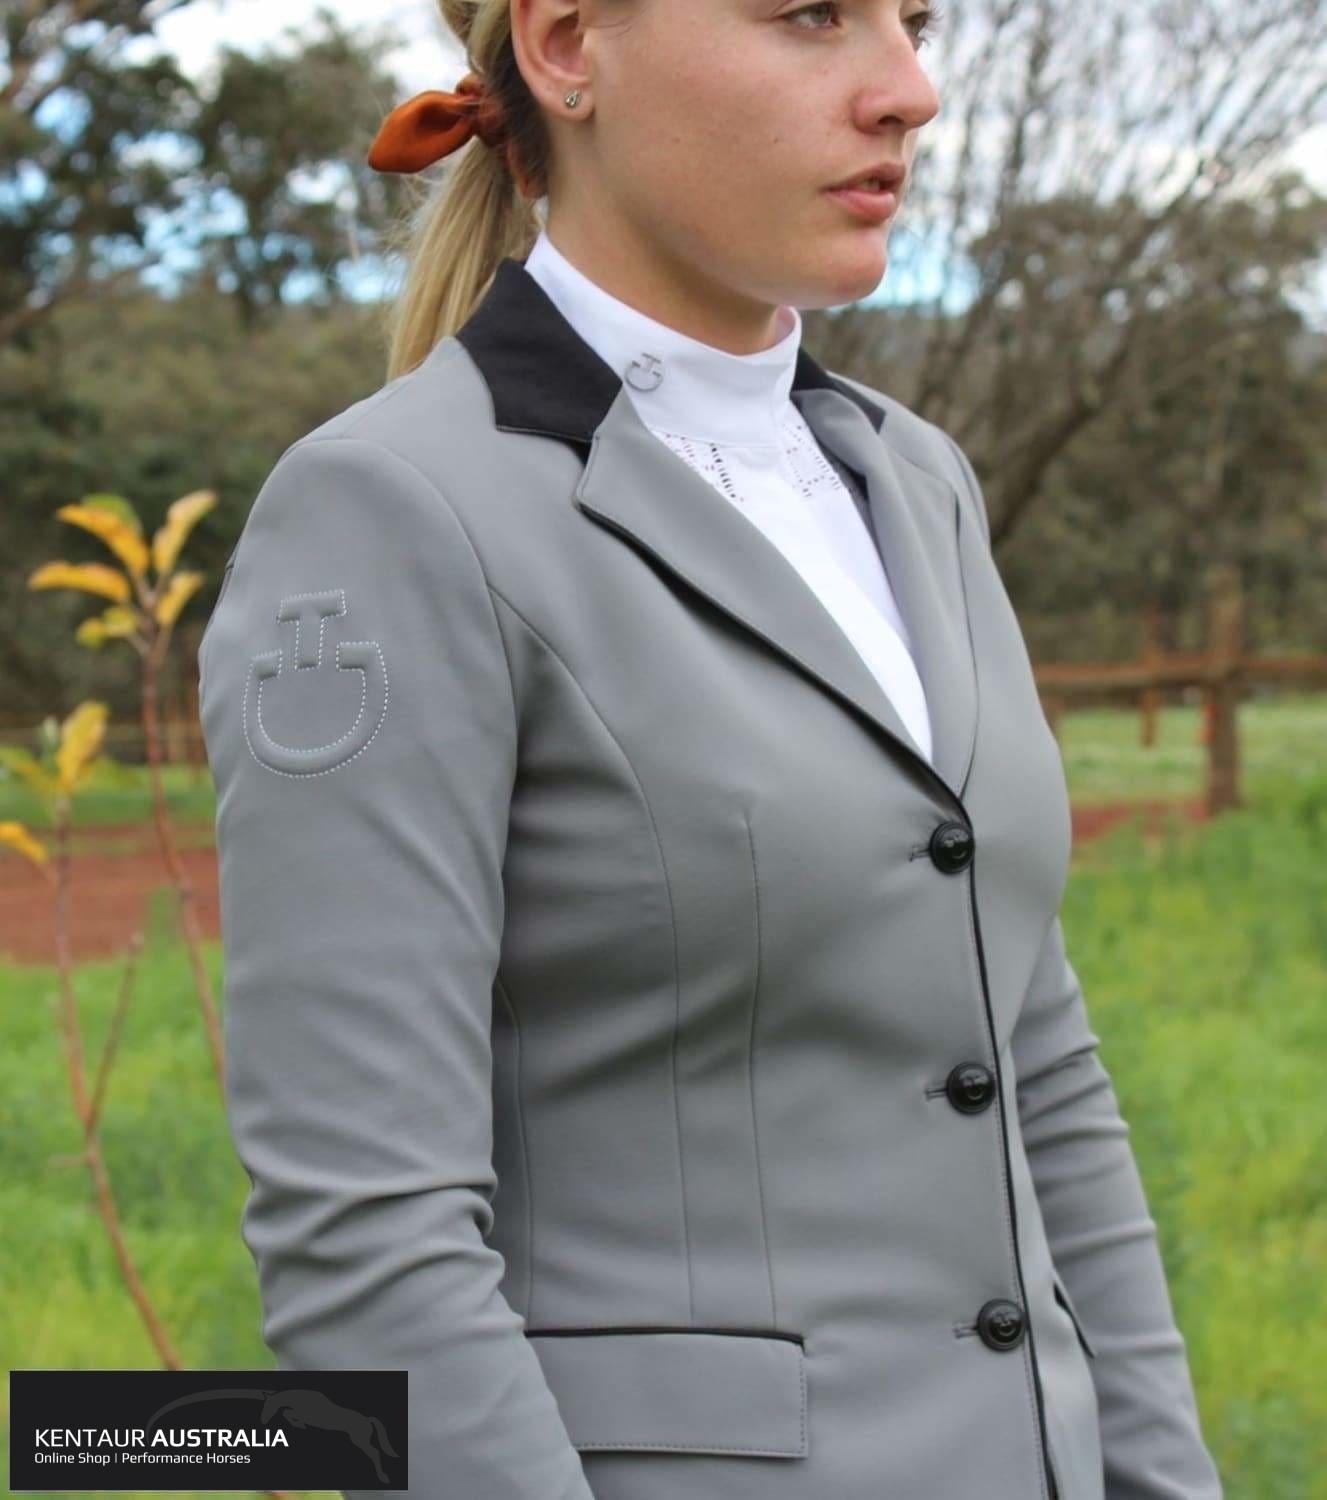 Cavalleria Toscana ‘Grand Prix’ Womens Competition Jacket Light Grey with Black collar (8300) / AU 12 Show Jackets